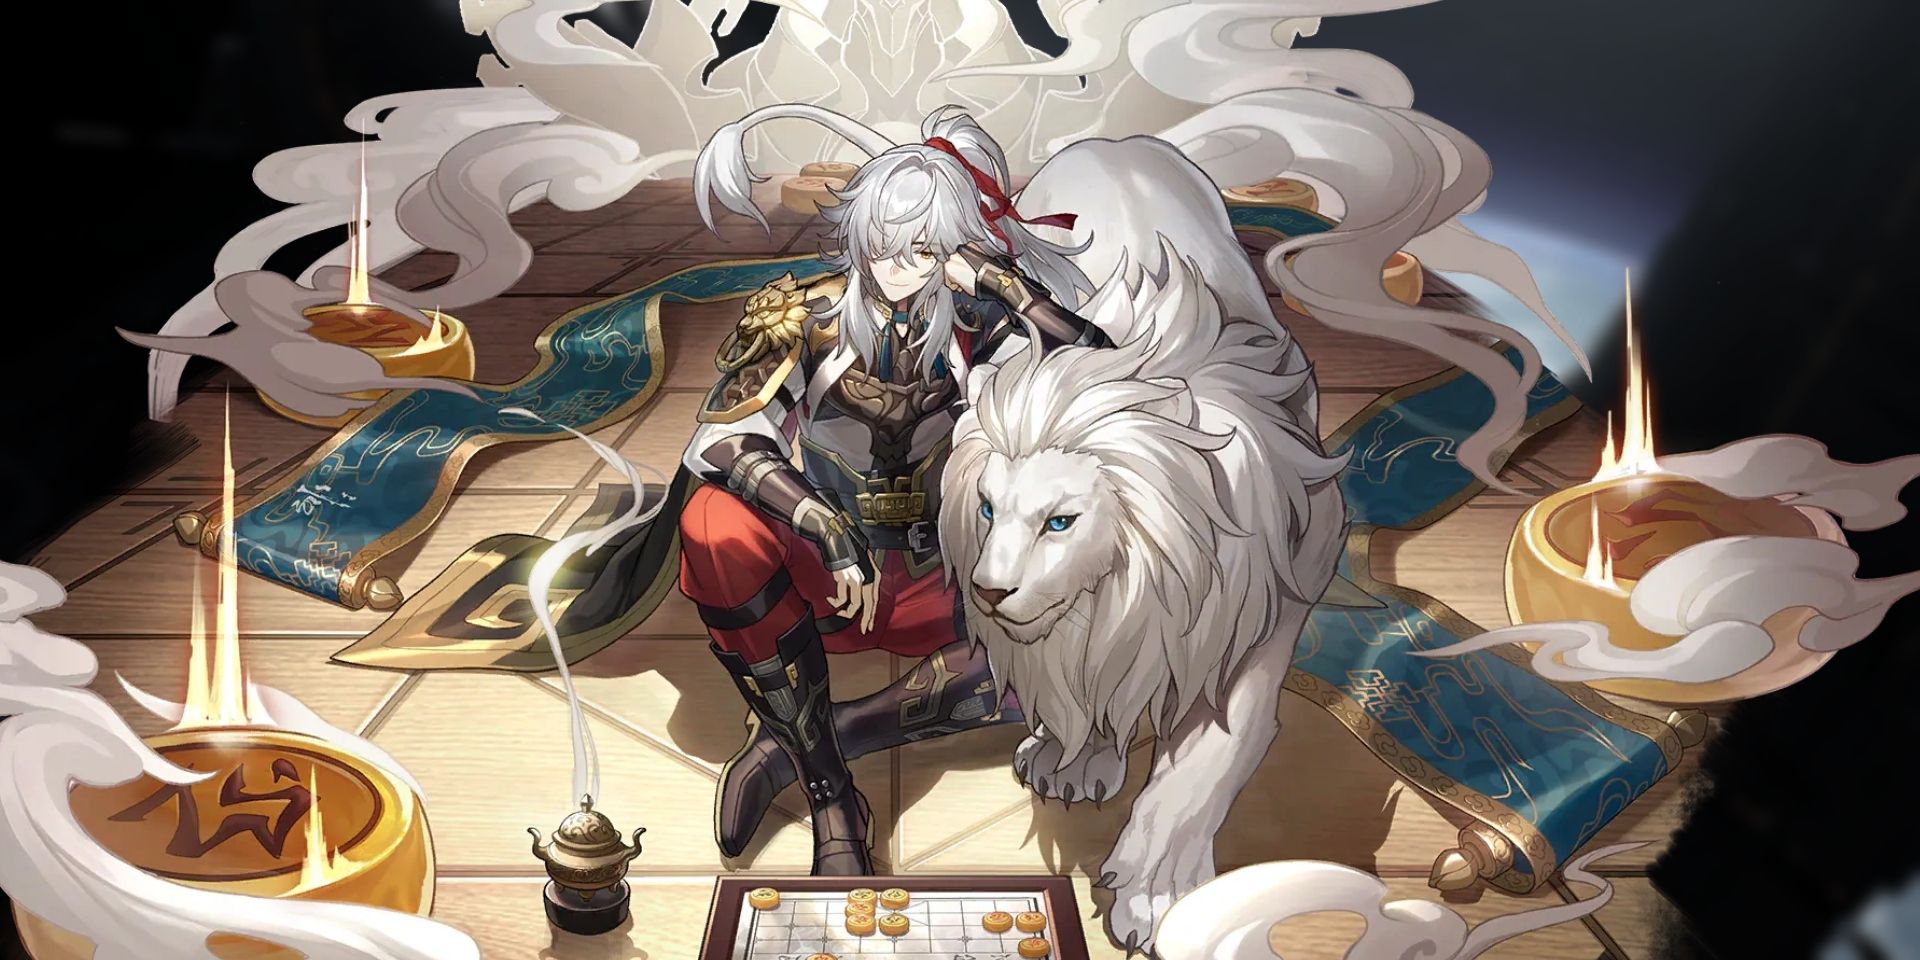 Honkai Star Rail's Jing Yuan rests his head on his hand while sitting down next to his white-furred lion. He looks at a game board, while smoke surrounds him.